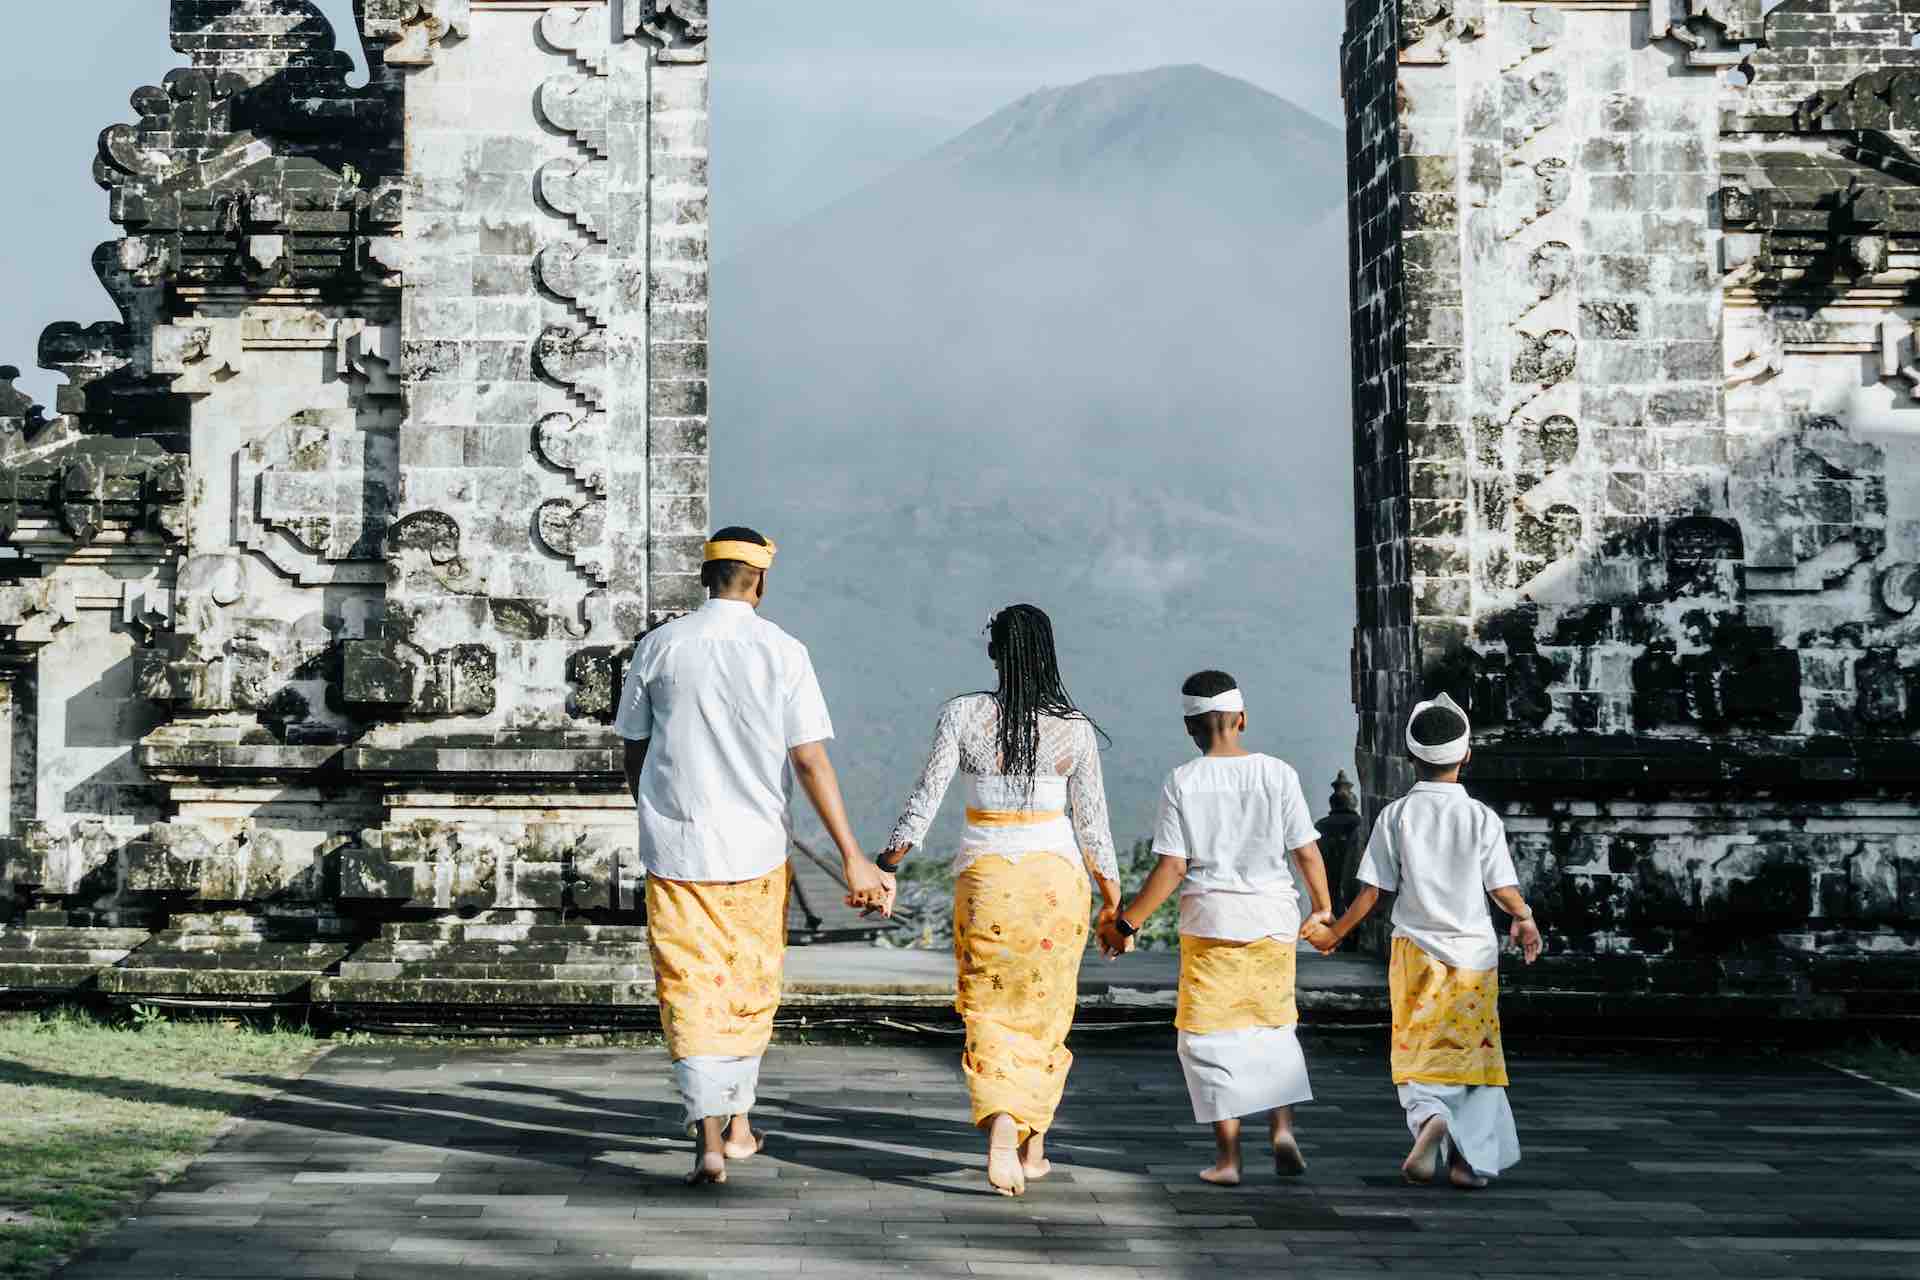 Bali Instagram tour family in traditional dress temple gate